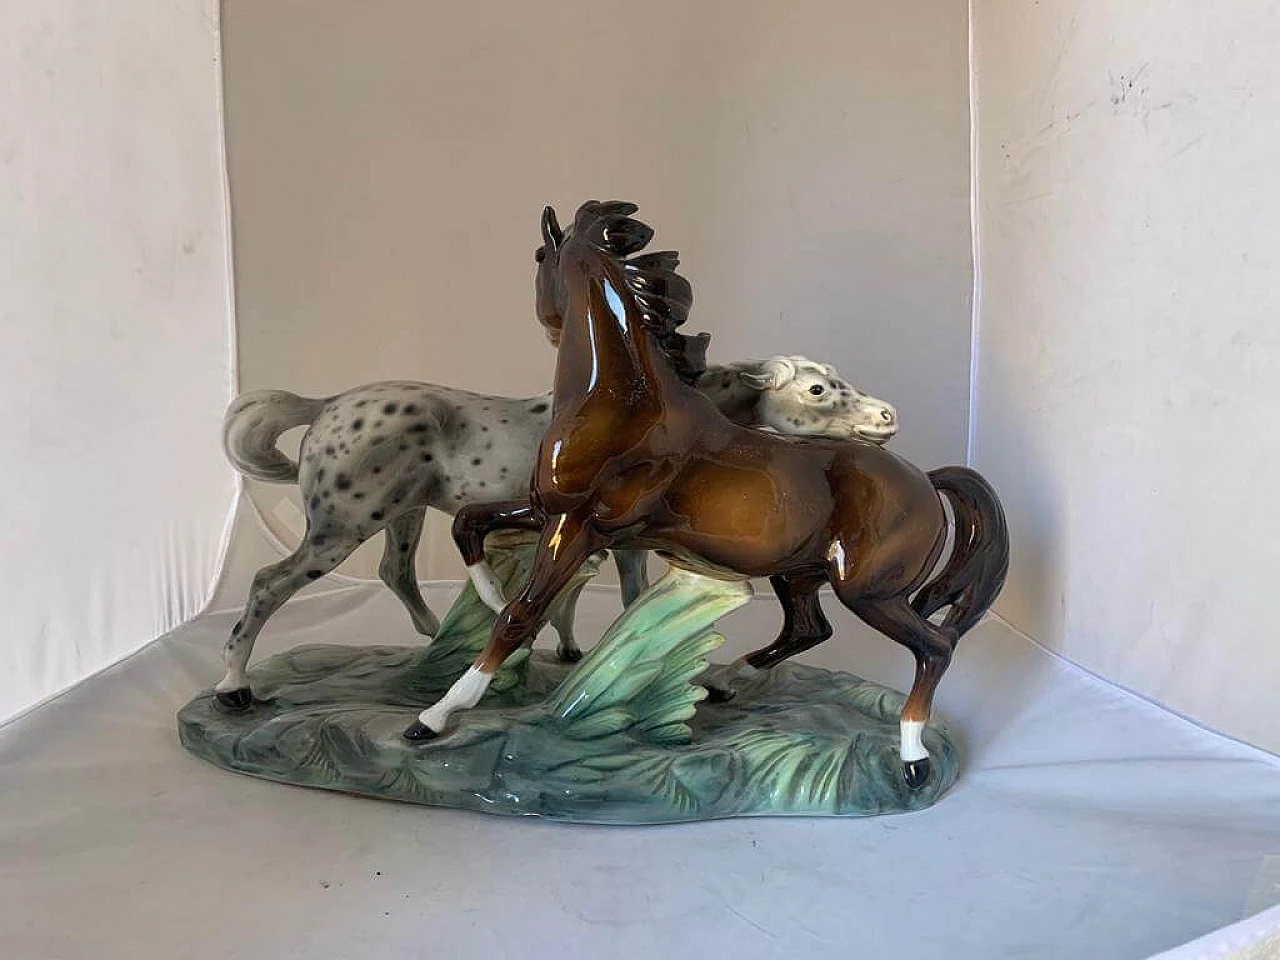 Ceramic sculpture of 2 horses by Ronzan, 1940s 1176522